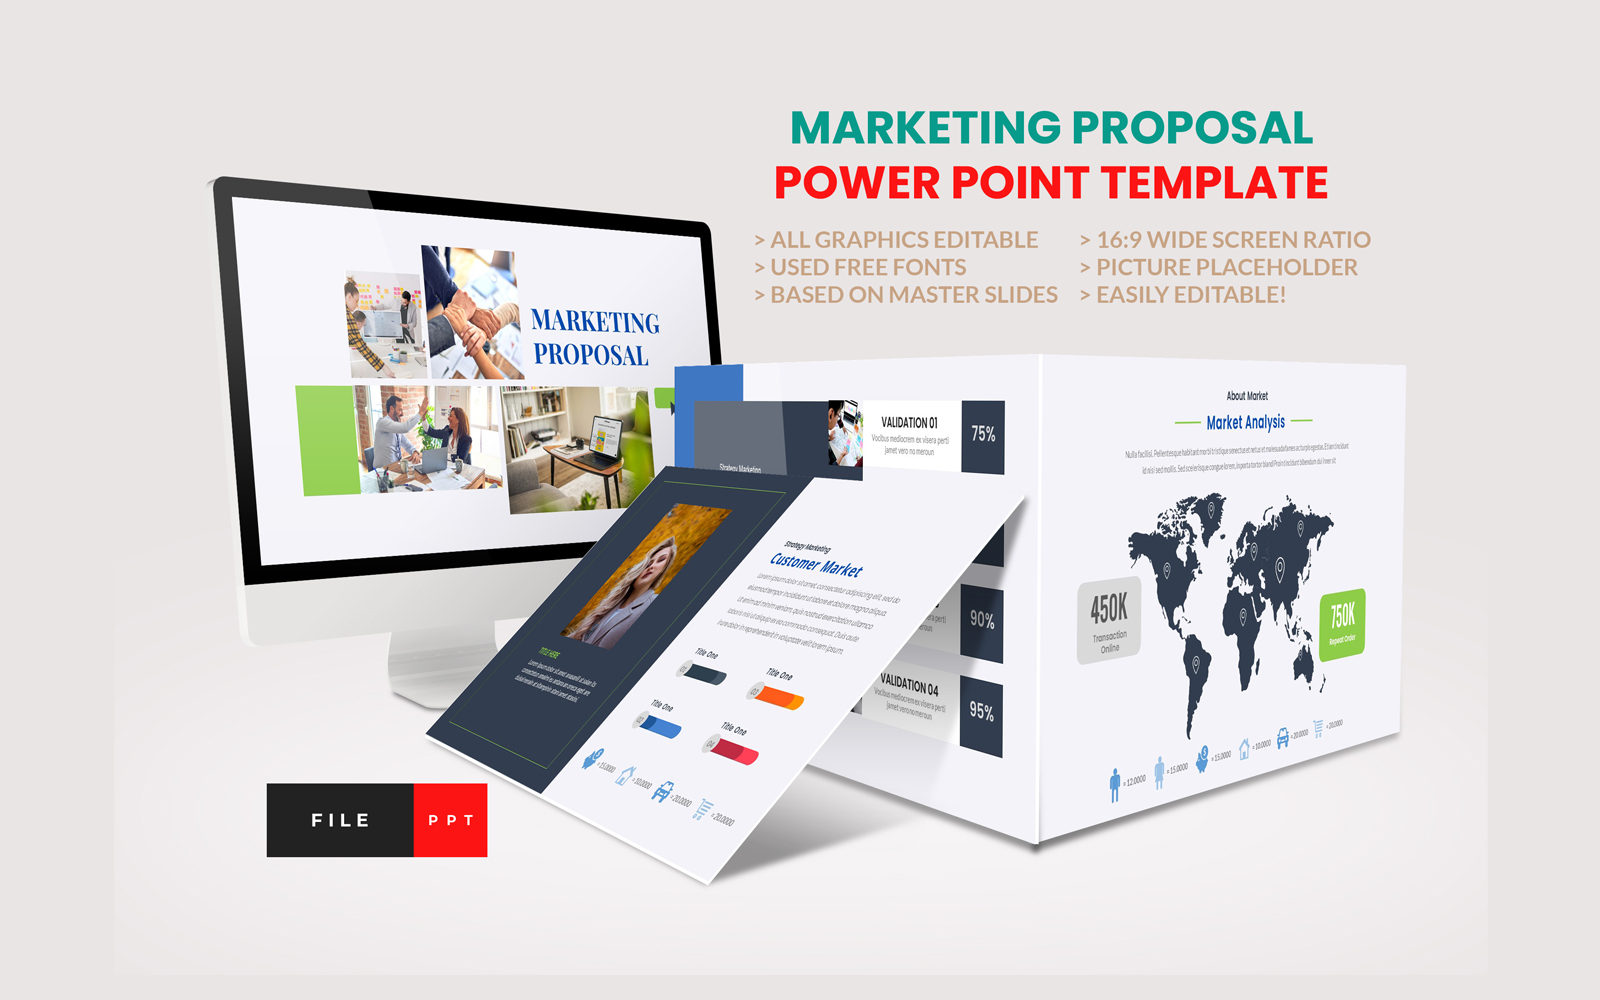 Marketing Proposal Power Point Template